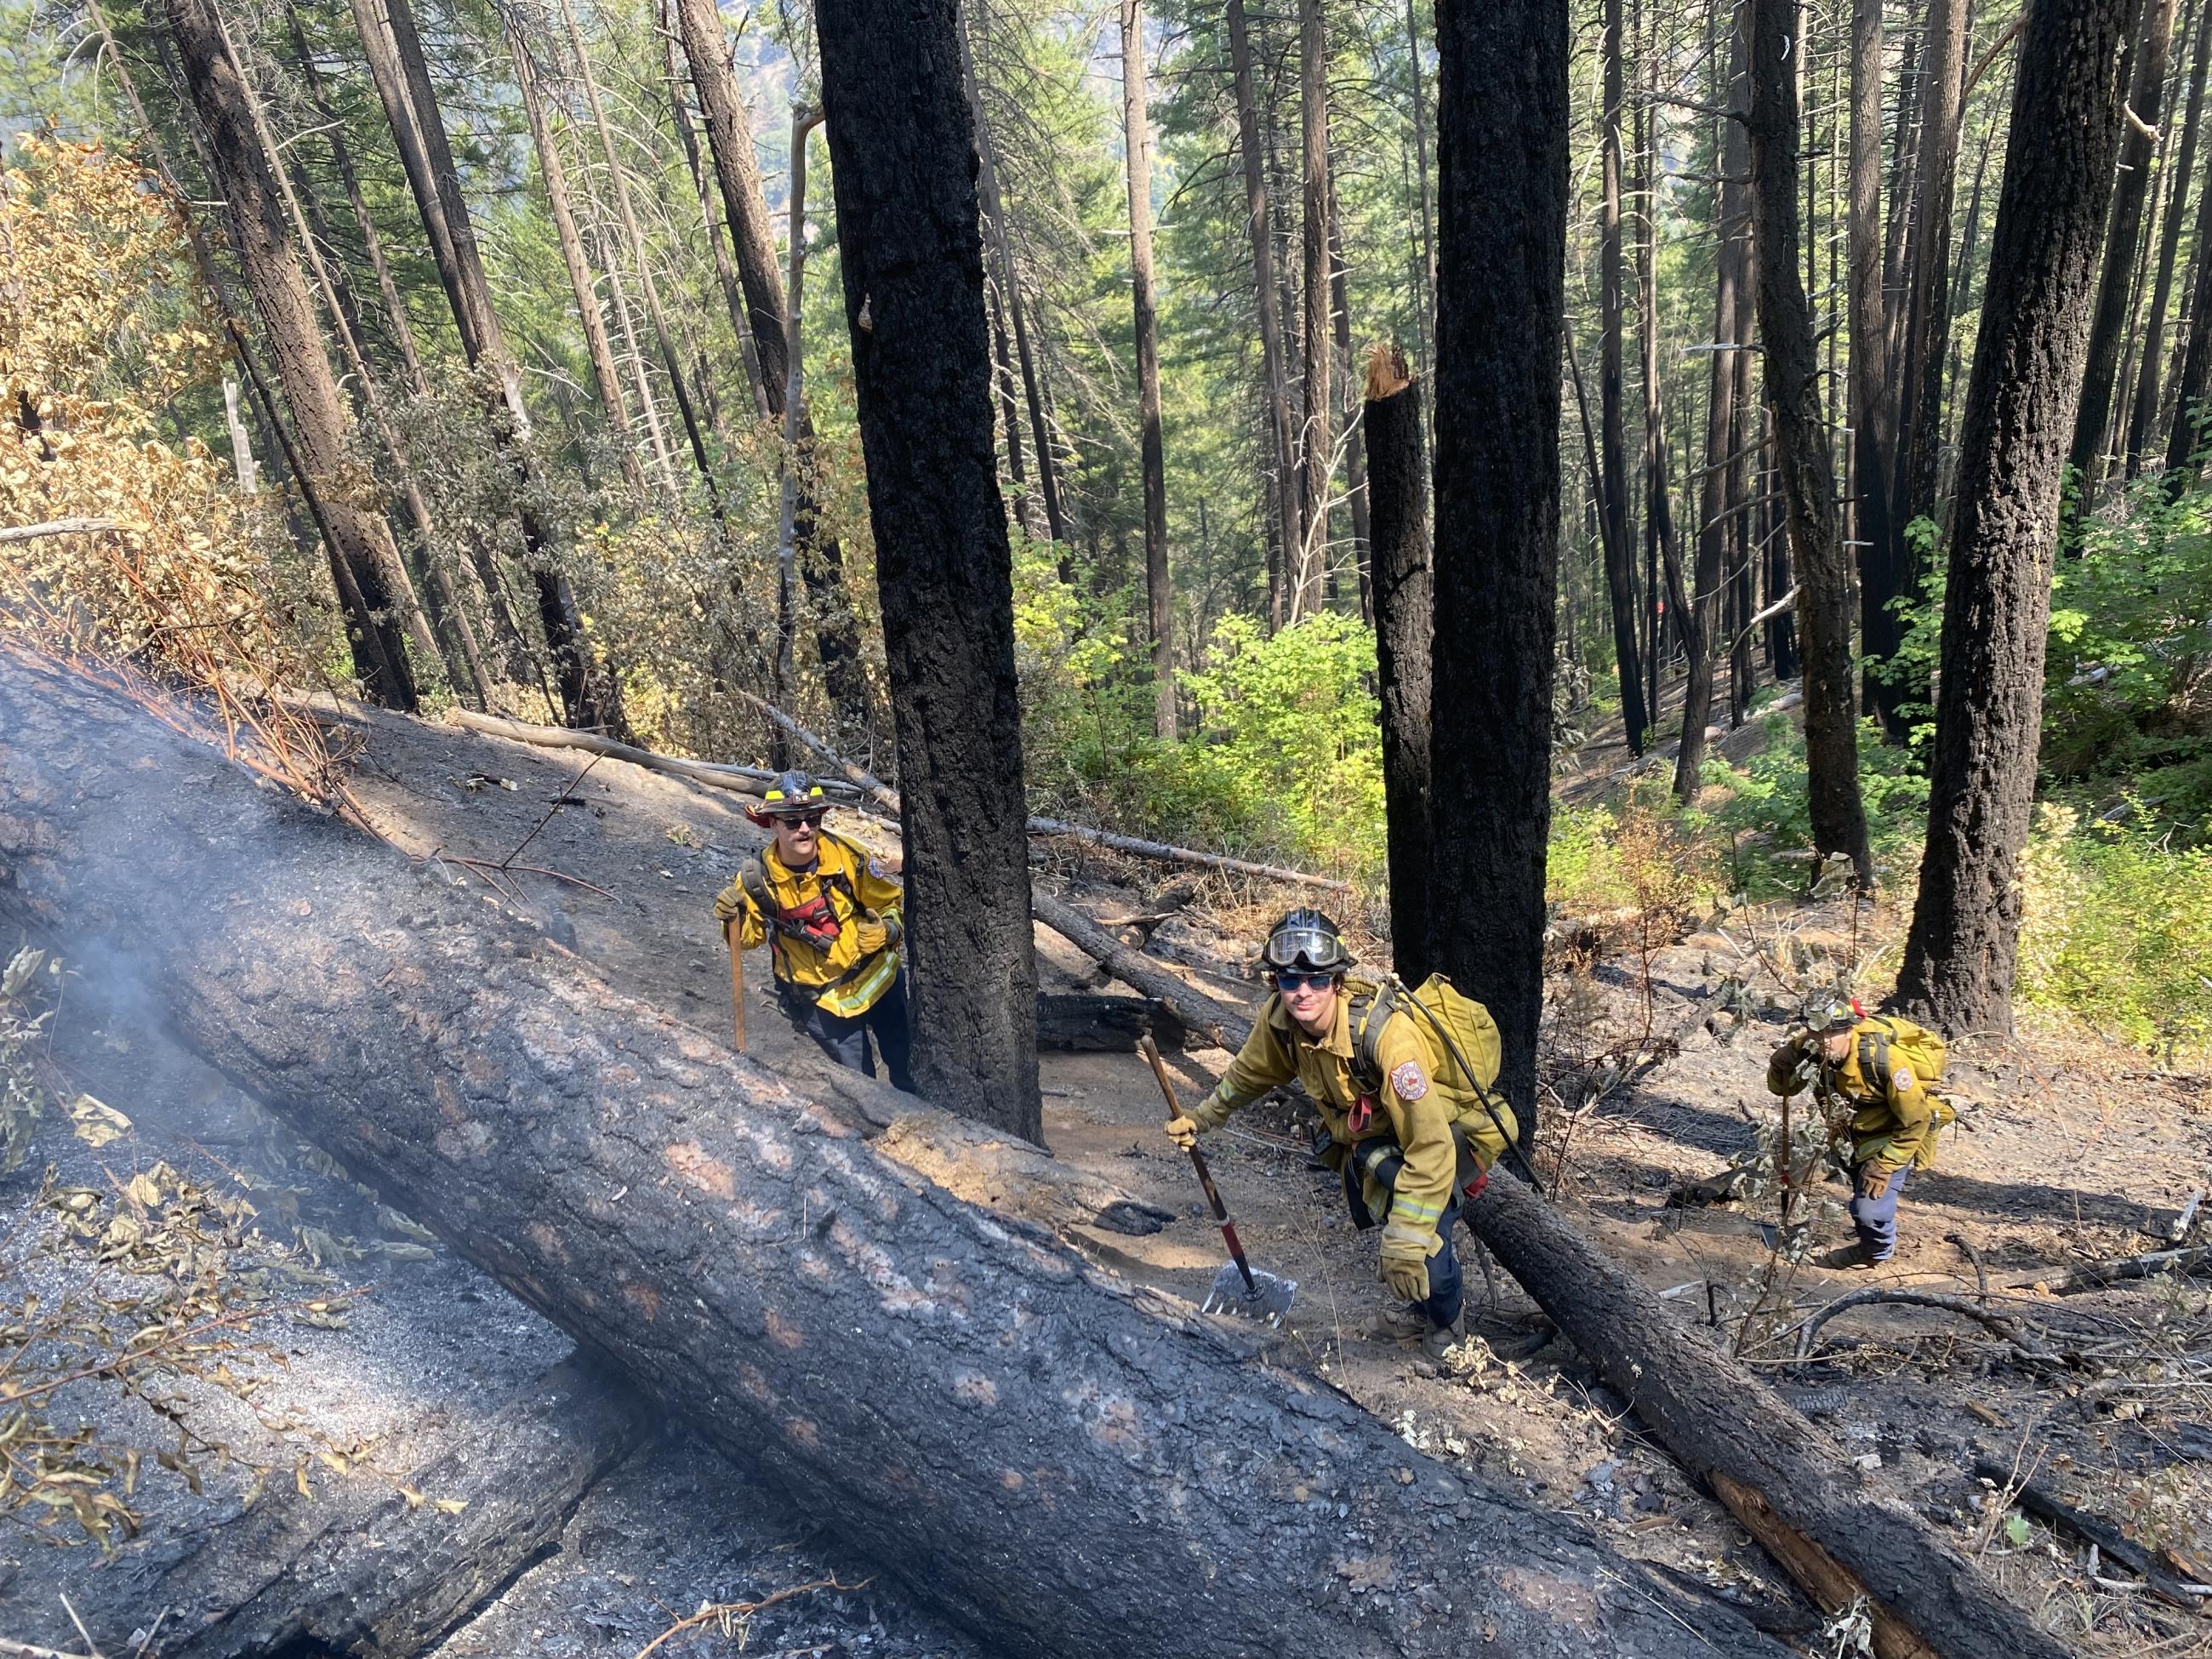 Image of firefighters working on a steep hillside with a smoldering log above them. Photo USDA Forest Service courtesy Daniel Ramey